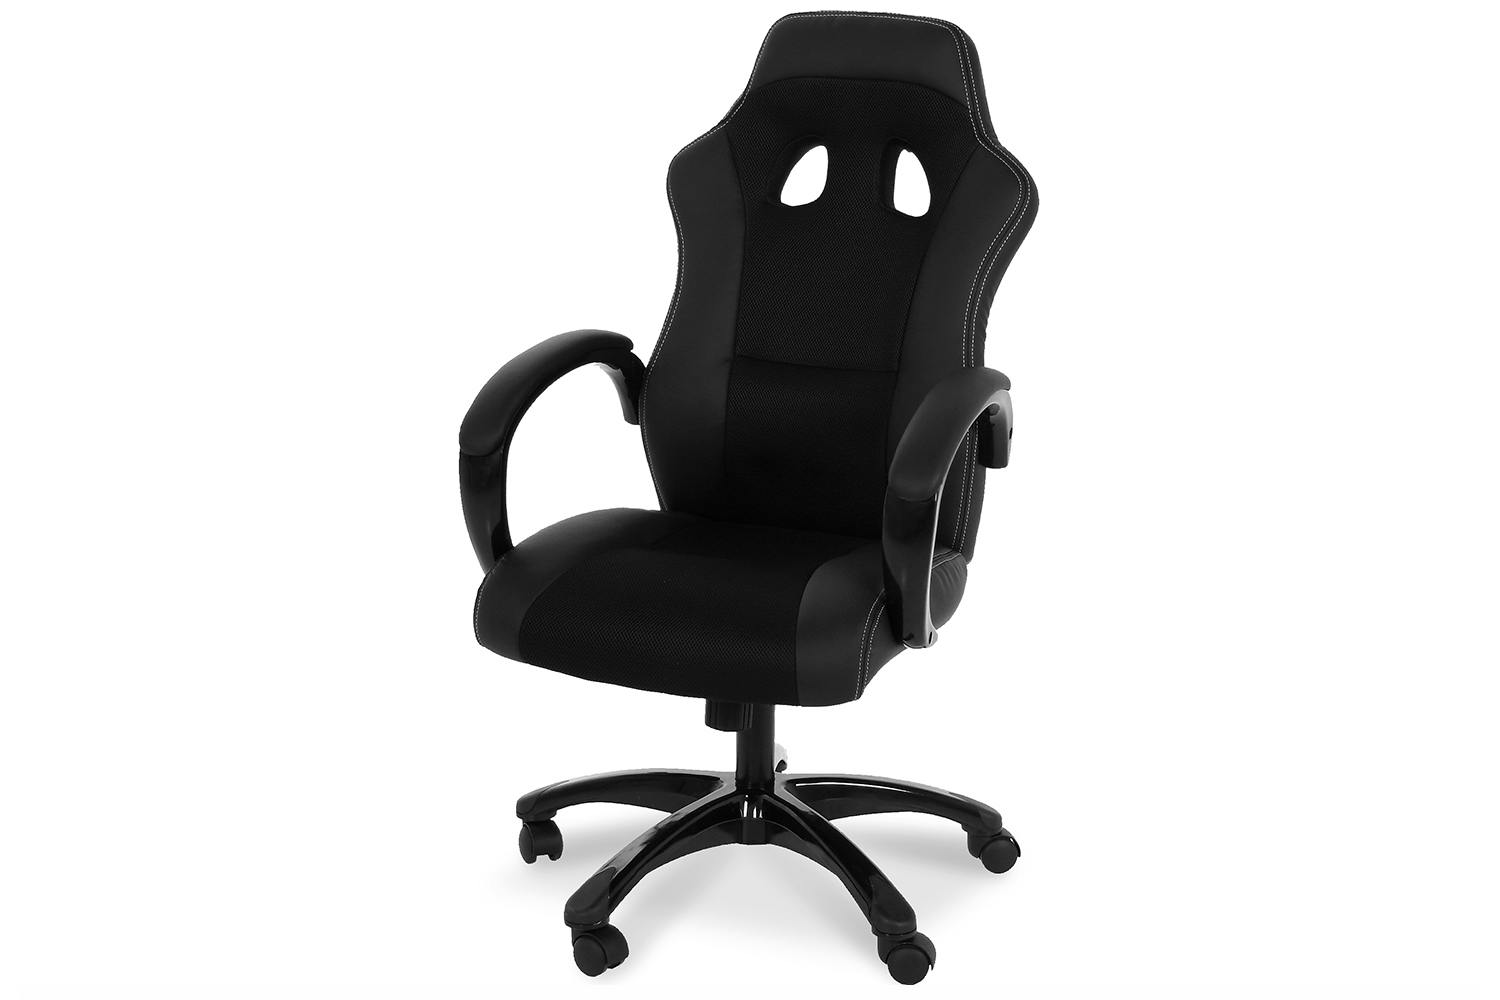 Race Office Chair Angle ?fit=fill&bg=0FFF&w=1500&h=1000&auto=format,compress